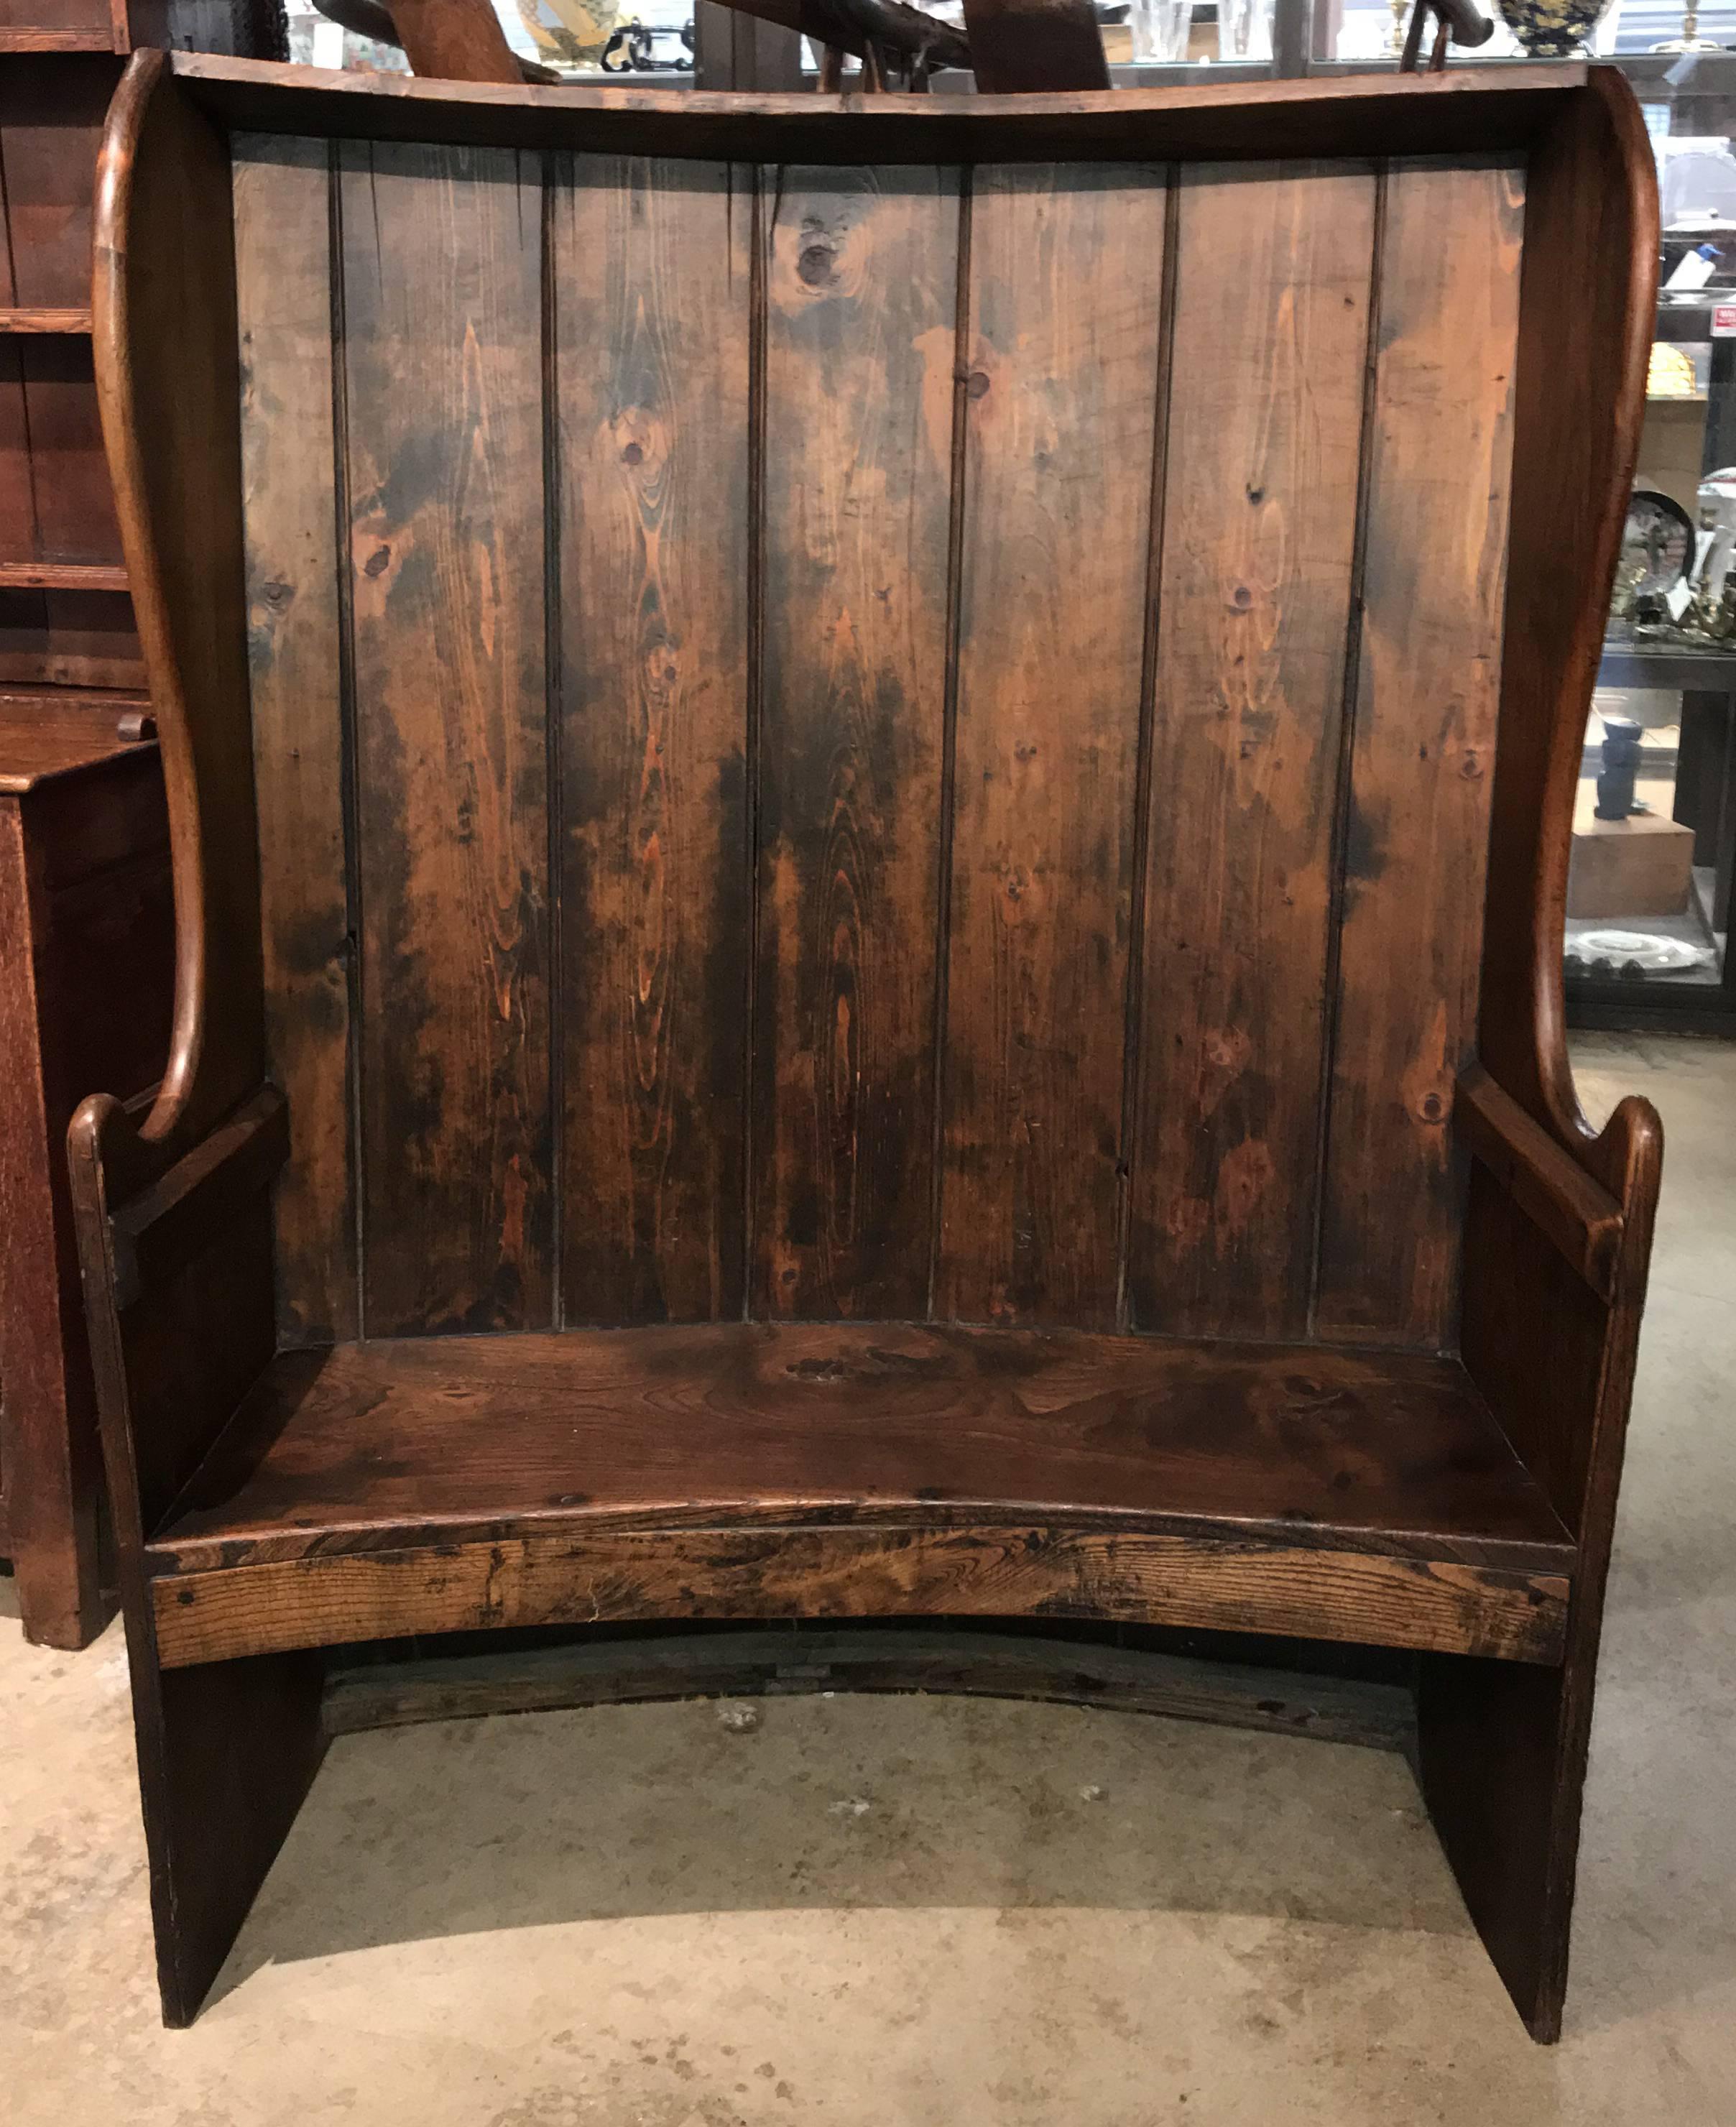 A wonderful form Georgian elmwood and pine curved settle with planked back, upswept arms, and conforming seat and apron. Includes a custom seat cushion. English, probably dating to the early 19th century. Very good overall condition, with